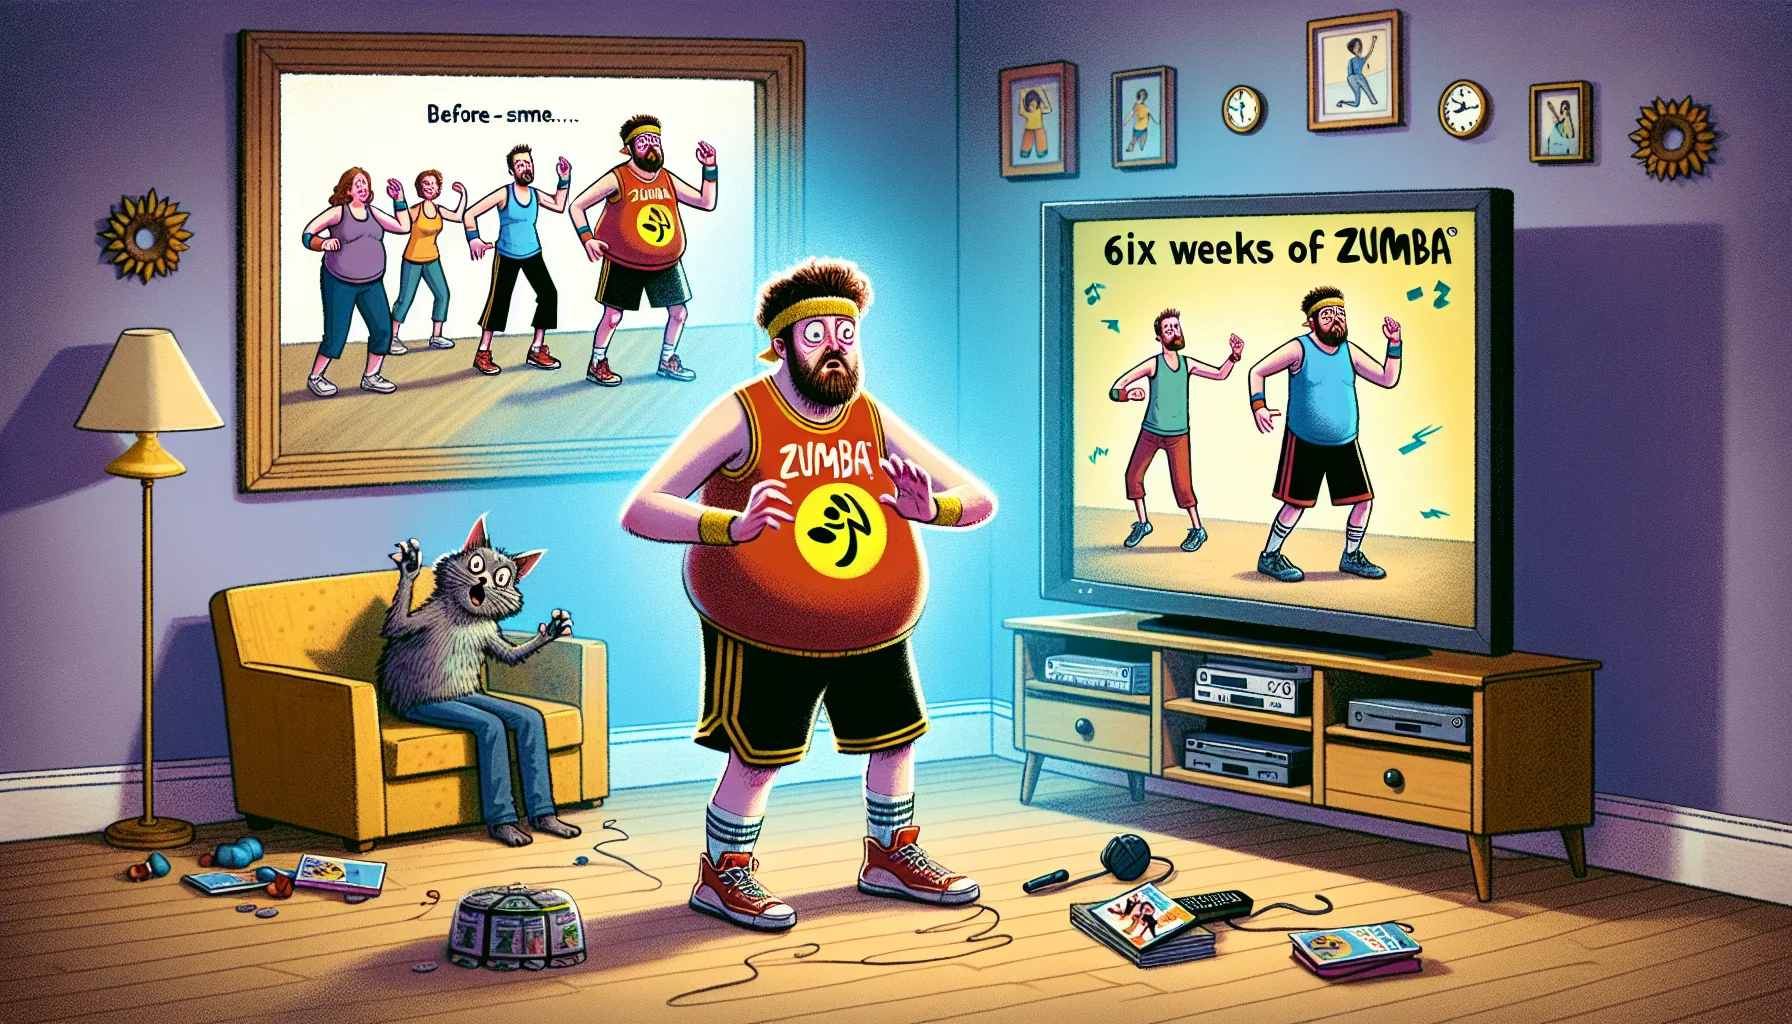 Imagine an amusing scenario that showcases the transformation after six weeks of Zumba, designed to encourage people to exercise. The scene includes two before-and-after images. In the first image, an out-of-shape, Caucasian man attempts to dance to a Zumba routine, looking confused and awkward in his oversized basketball shorts and t-shirt. In the background, a Zumba DVD plays on a television in a living room. In the second image, the same man appears again, but this time he's a lot more fit and confident, dancing with gusto in his perfectly fitting workout clothes, following the Zumba moves flawlessly. A surprised cat, knocked over plant pot, or other funny element should be included to add a layer of humor.